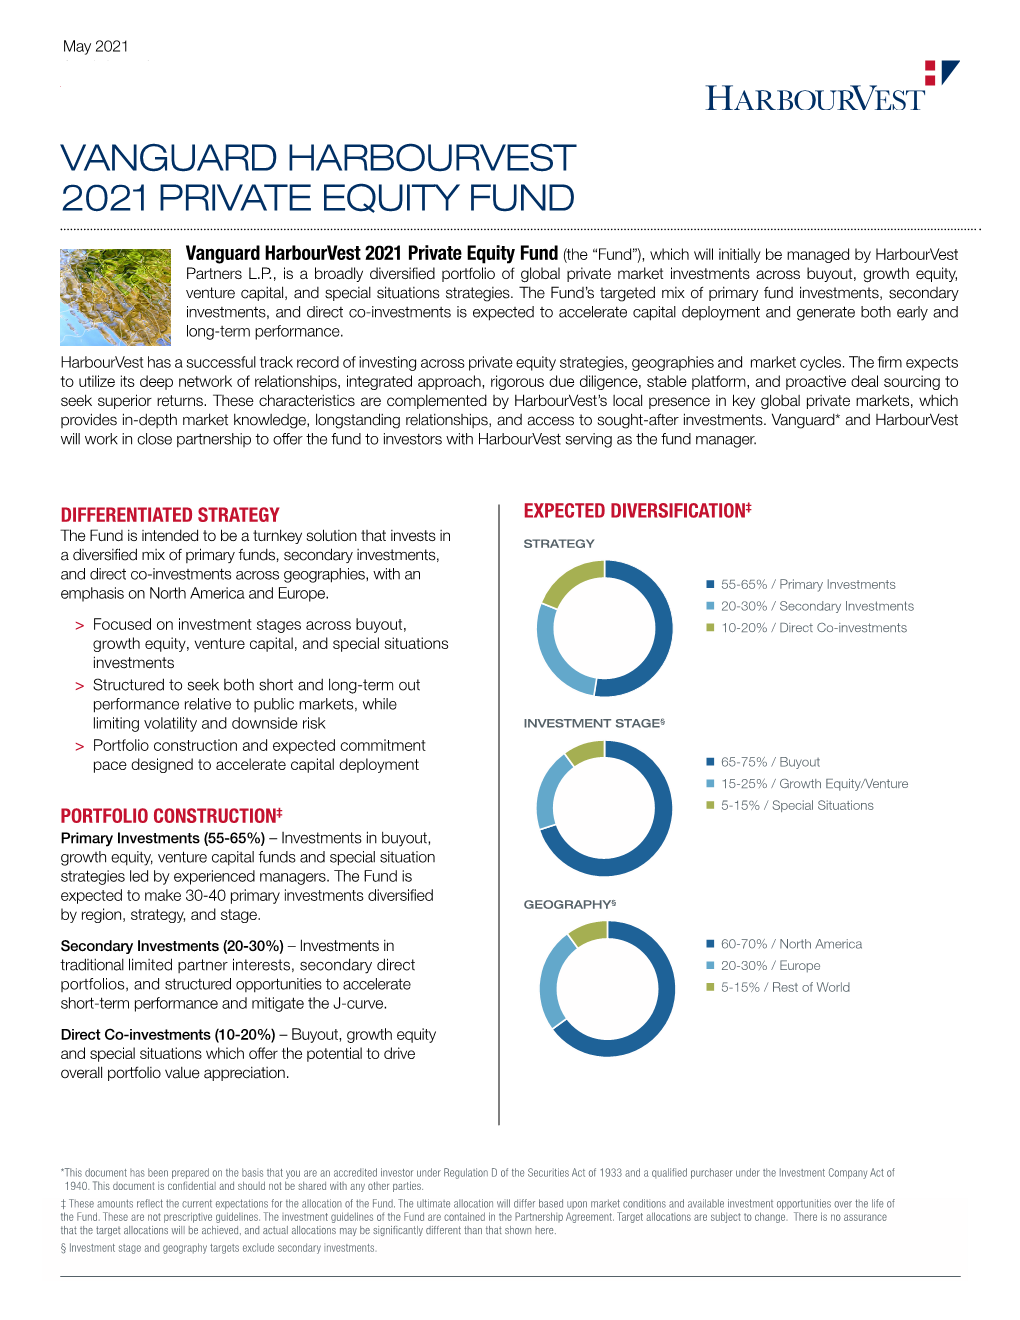 Vanguard Harbourvest 2021 Private Equity Fund